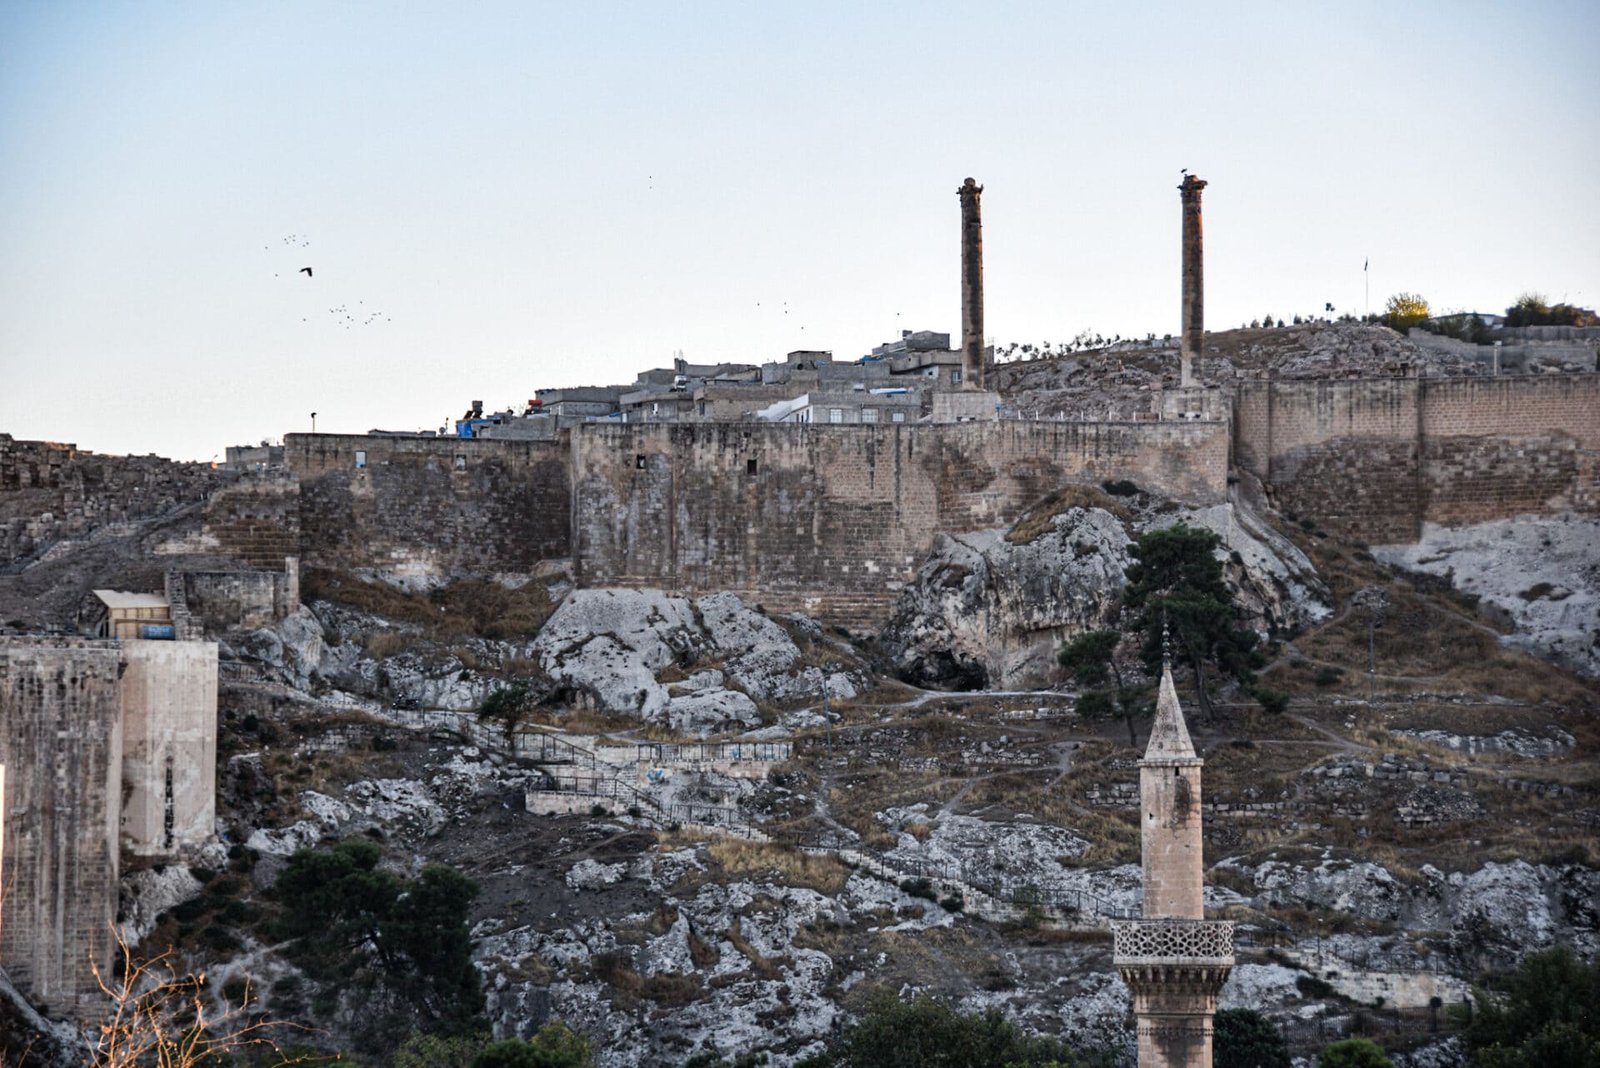 panoramic view of Sanliurfa citadel enthroned on a rocky hill towering above the old town